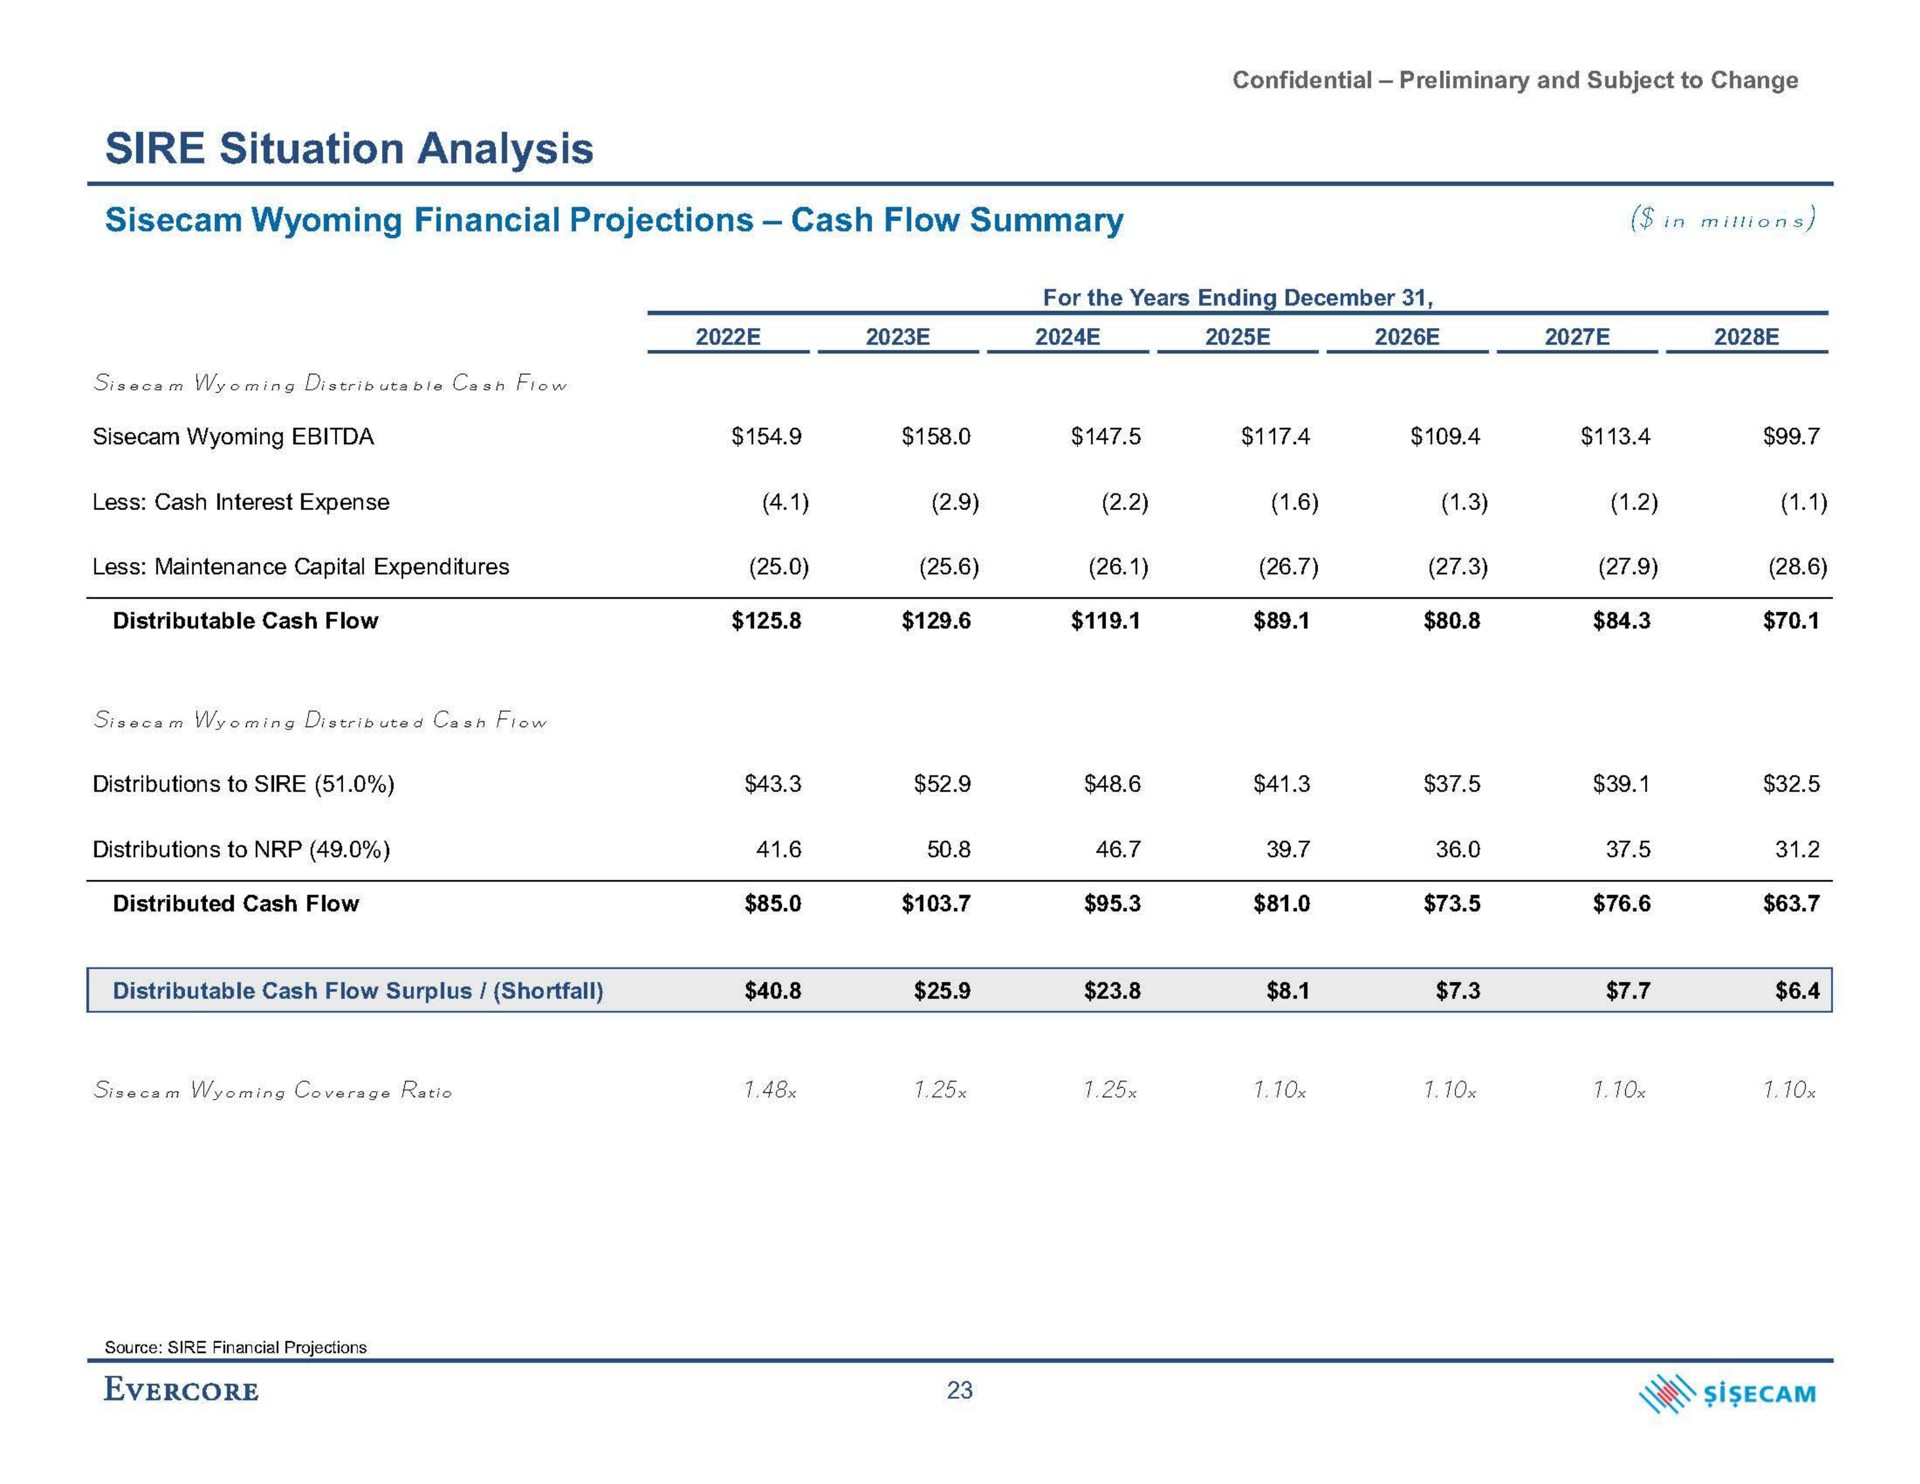 sire situation analysis financial projections cash flow summary | Evercore